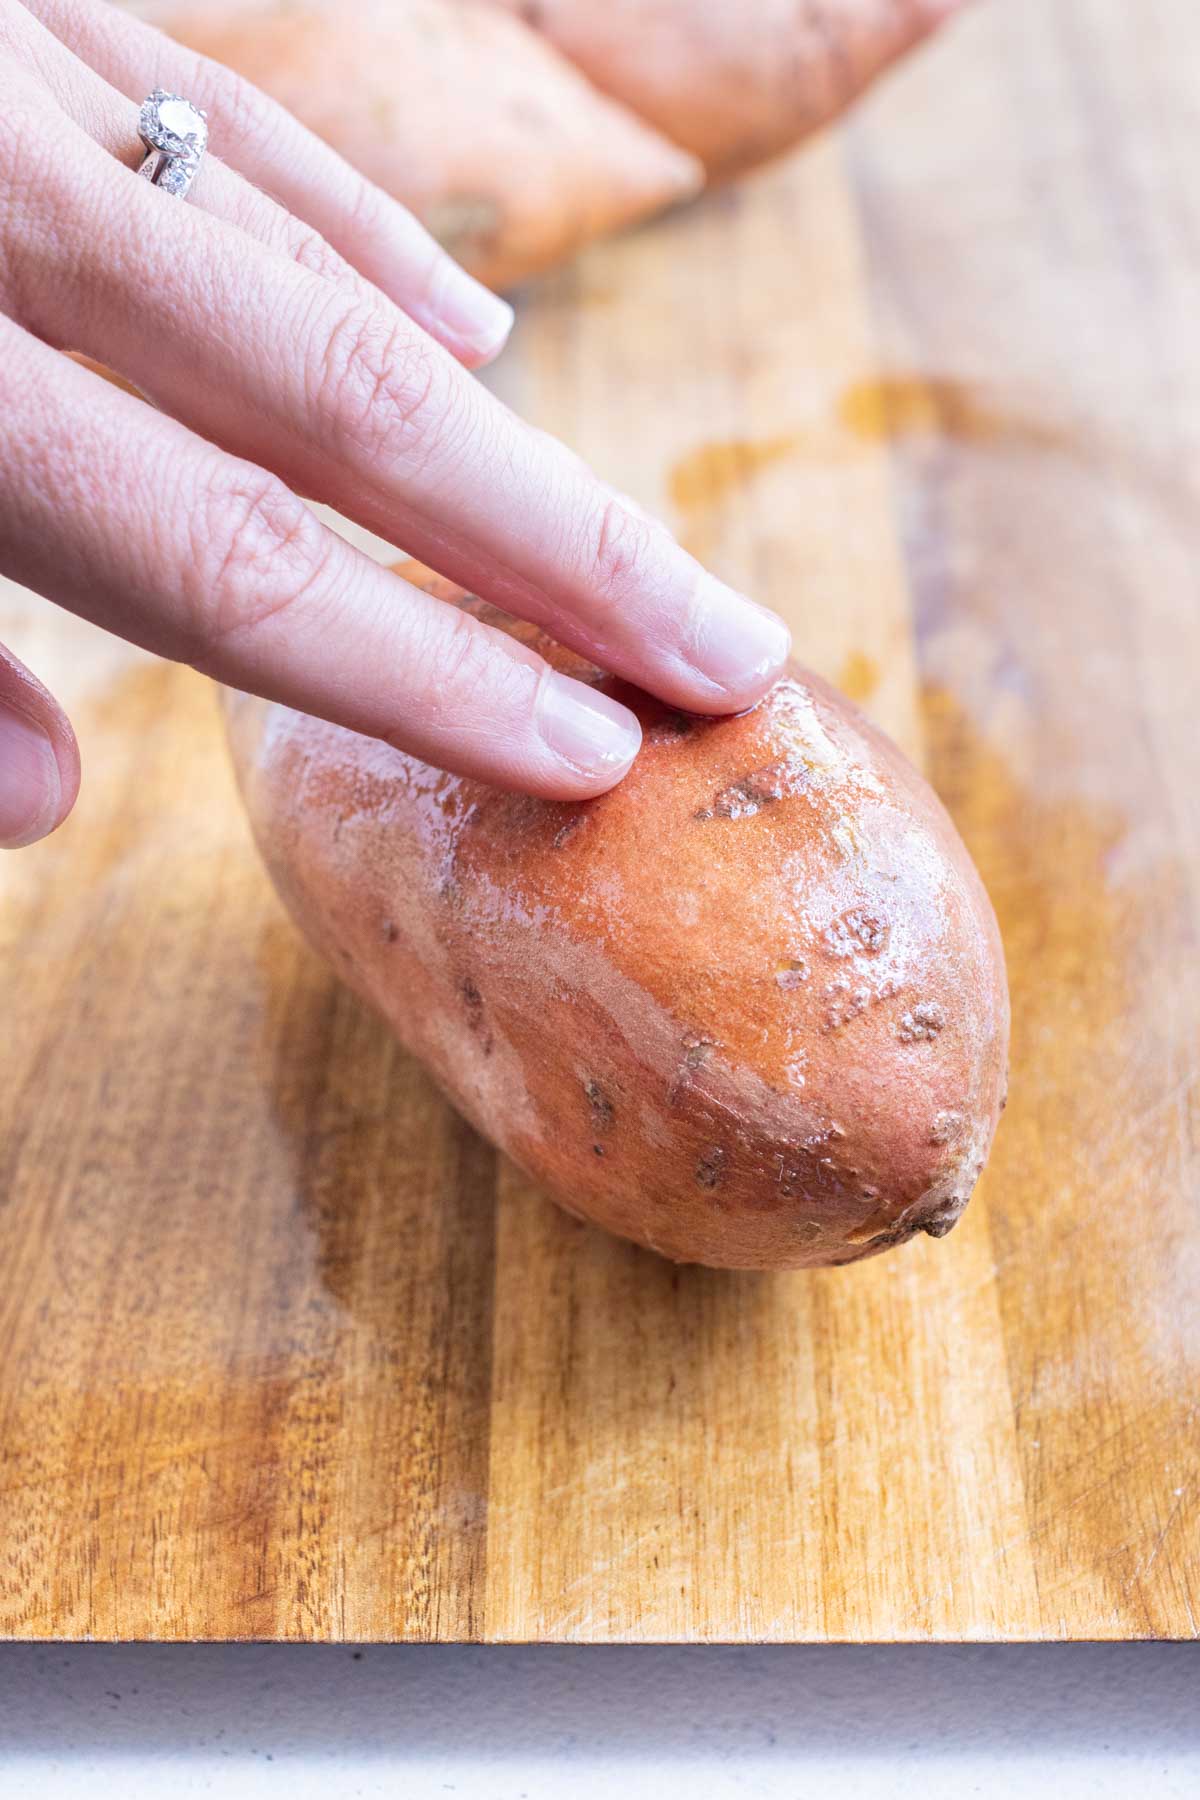 Fingers rub the oil into the skin of a sweet potato.